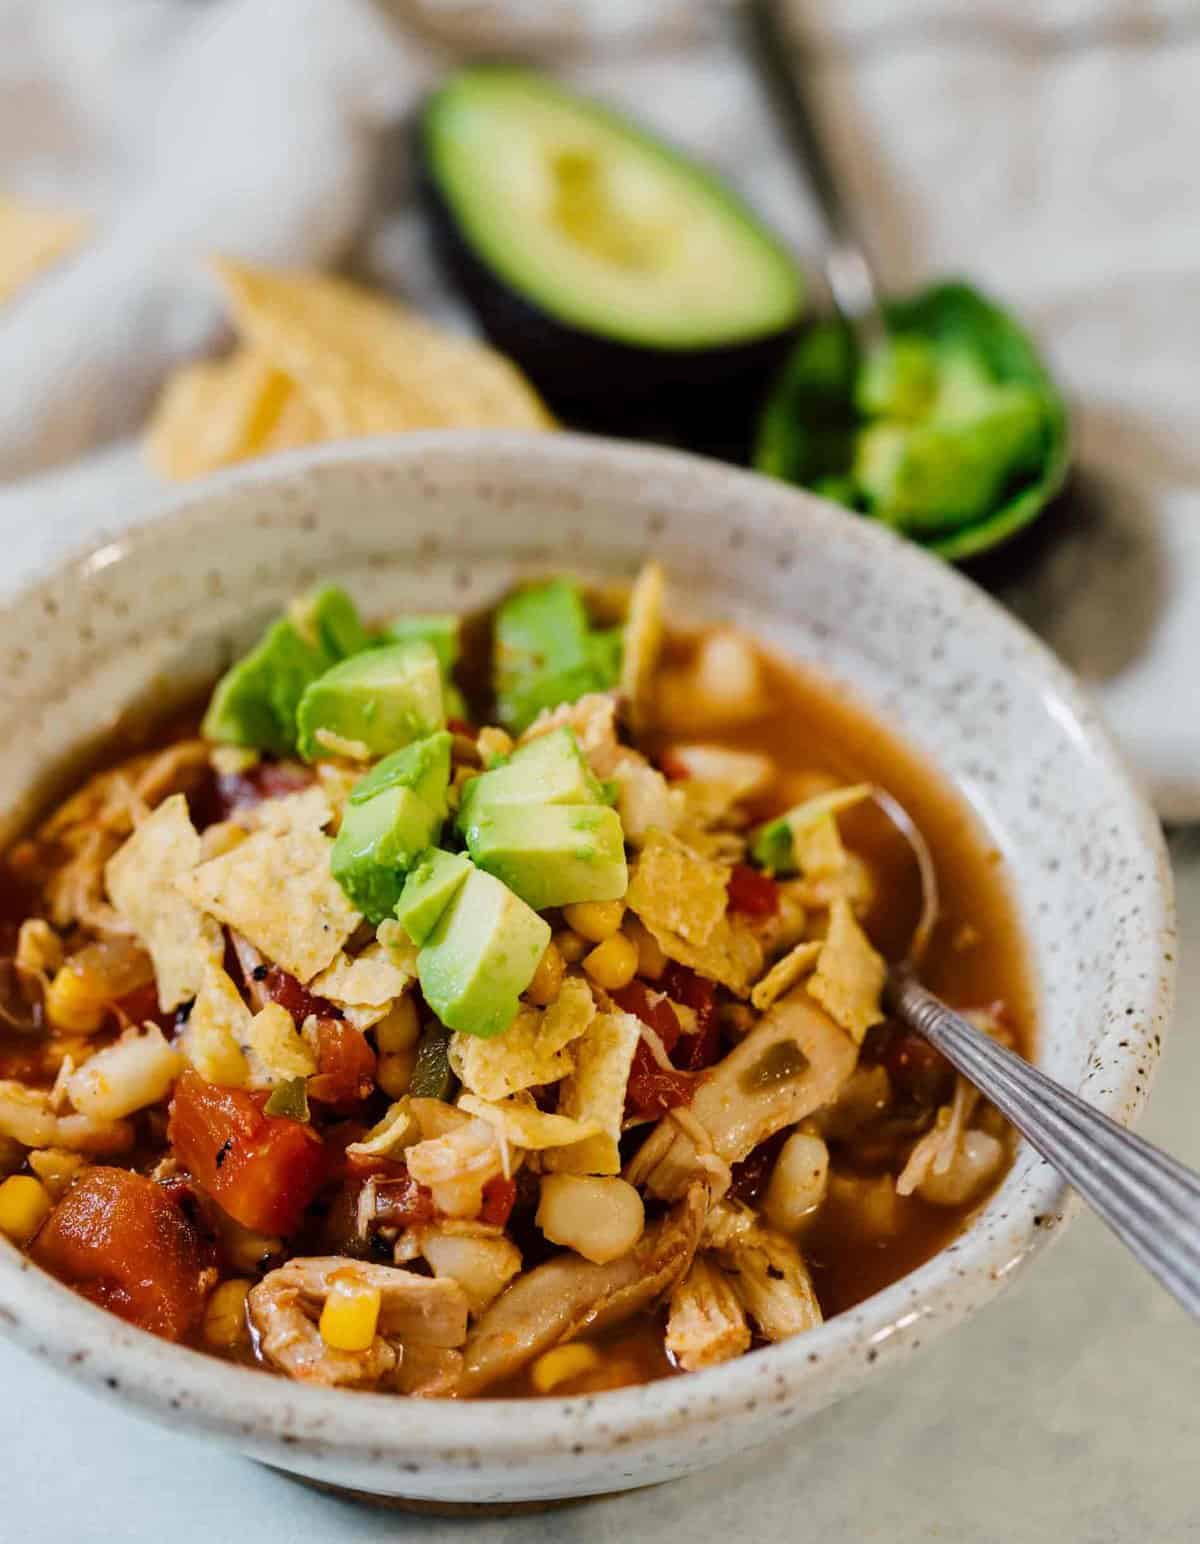 This chicken tortilla soup made on the stovetop is deliciously flavorful and spicy! You'll love how quickly it comes together and all the textures throughout the soup! The broth is SO good you'll be going back for more bowls!